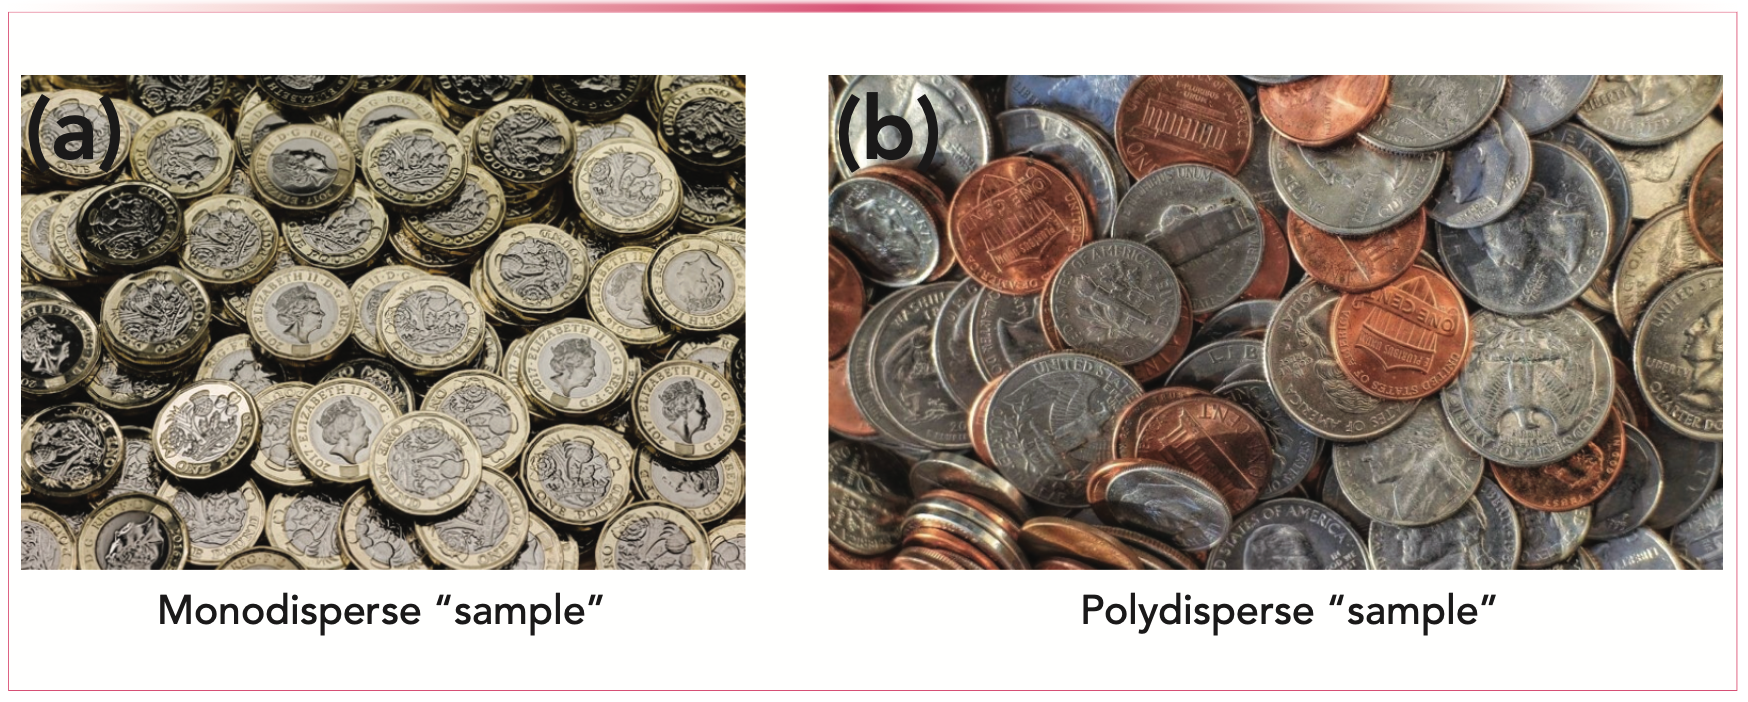 FIGURE 2: The best way to depict what polydispersity means, showing the (a) monodisperse sample, and the (b) polydisperse sample.